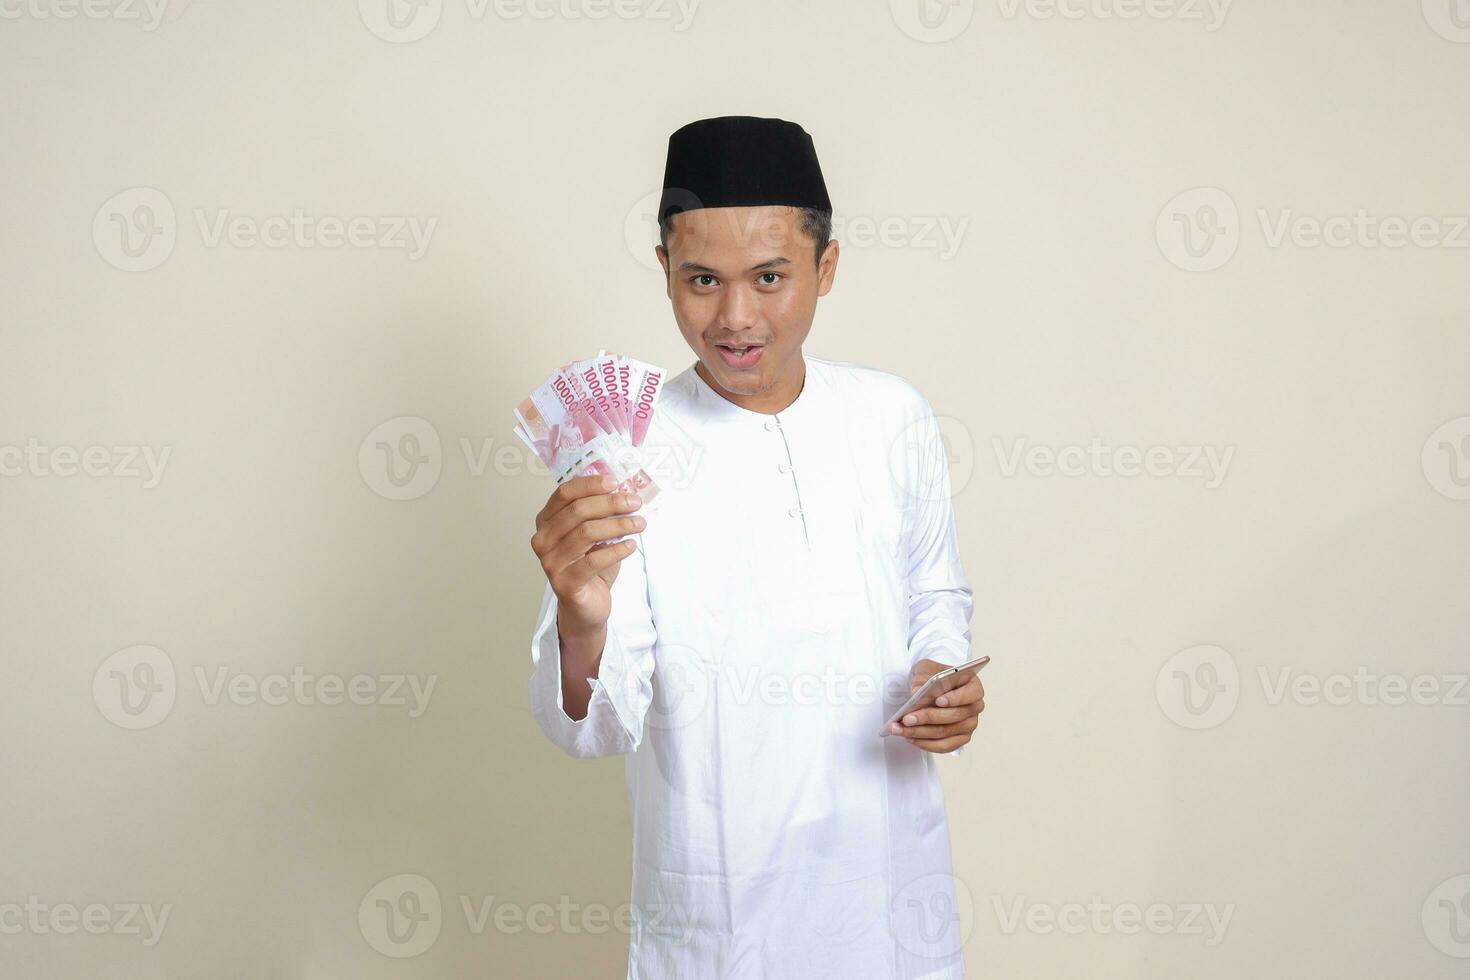 Portrait of attractive Asian muslim man in white shirt showing one hundred thousand rupiah while using mobile phone. Financial and savings concept. Isolated image on gray background photo